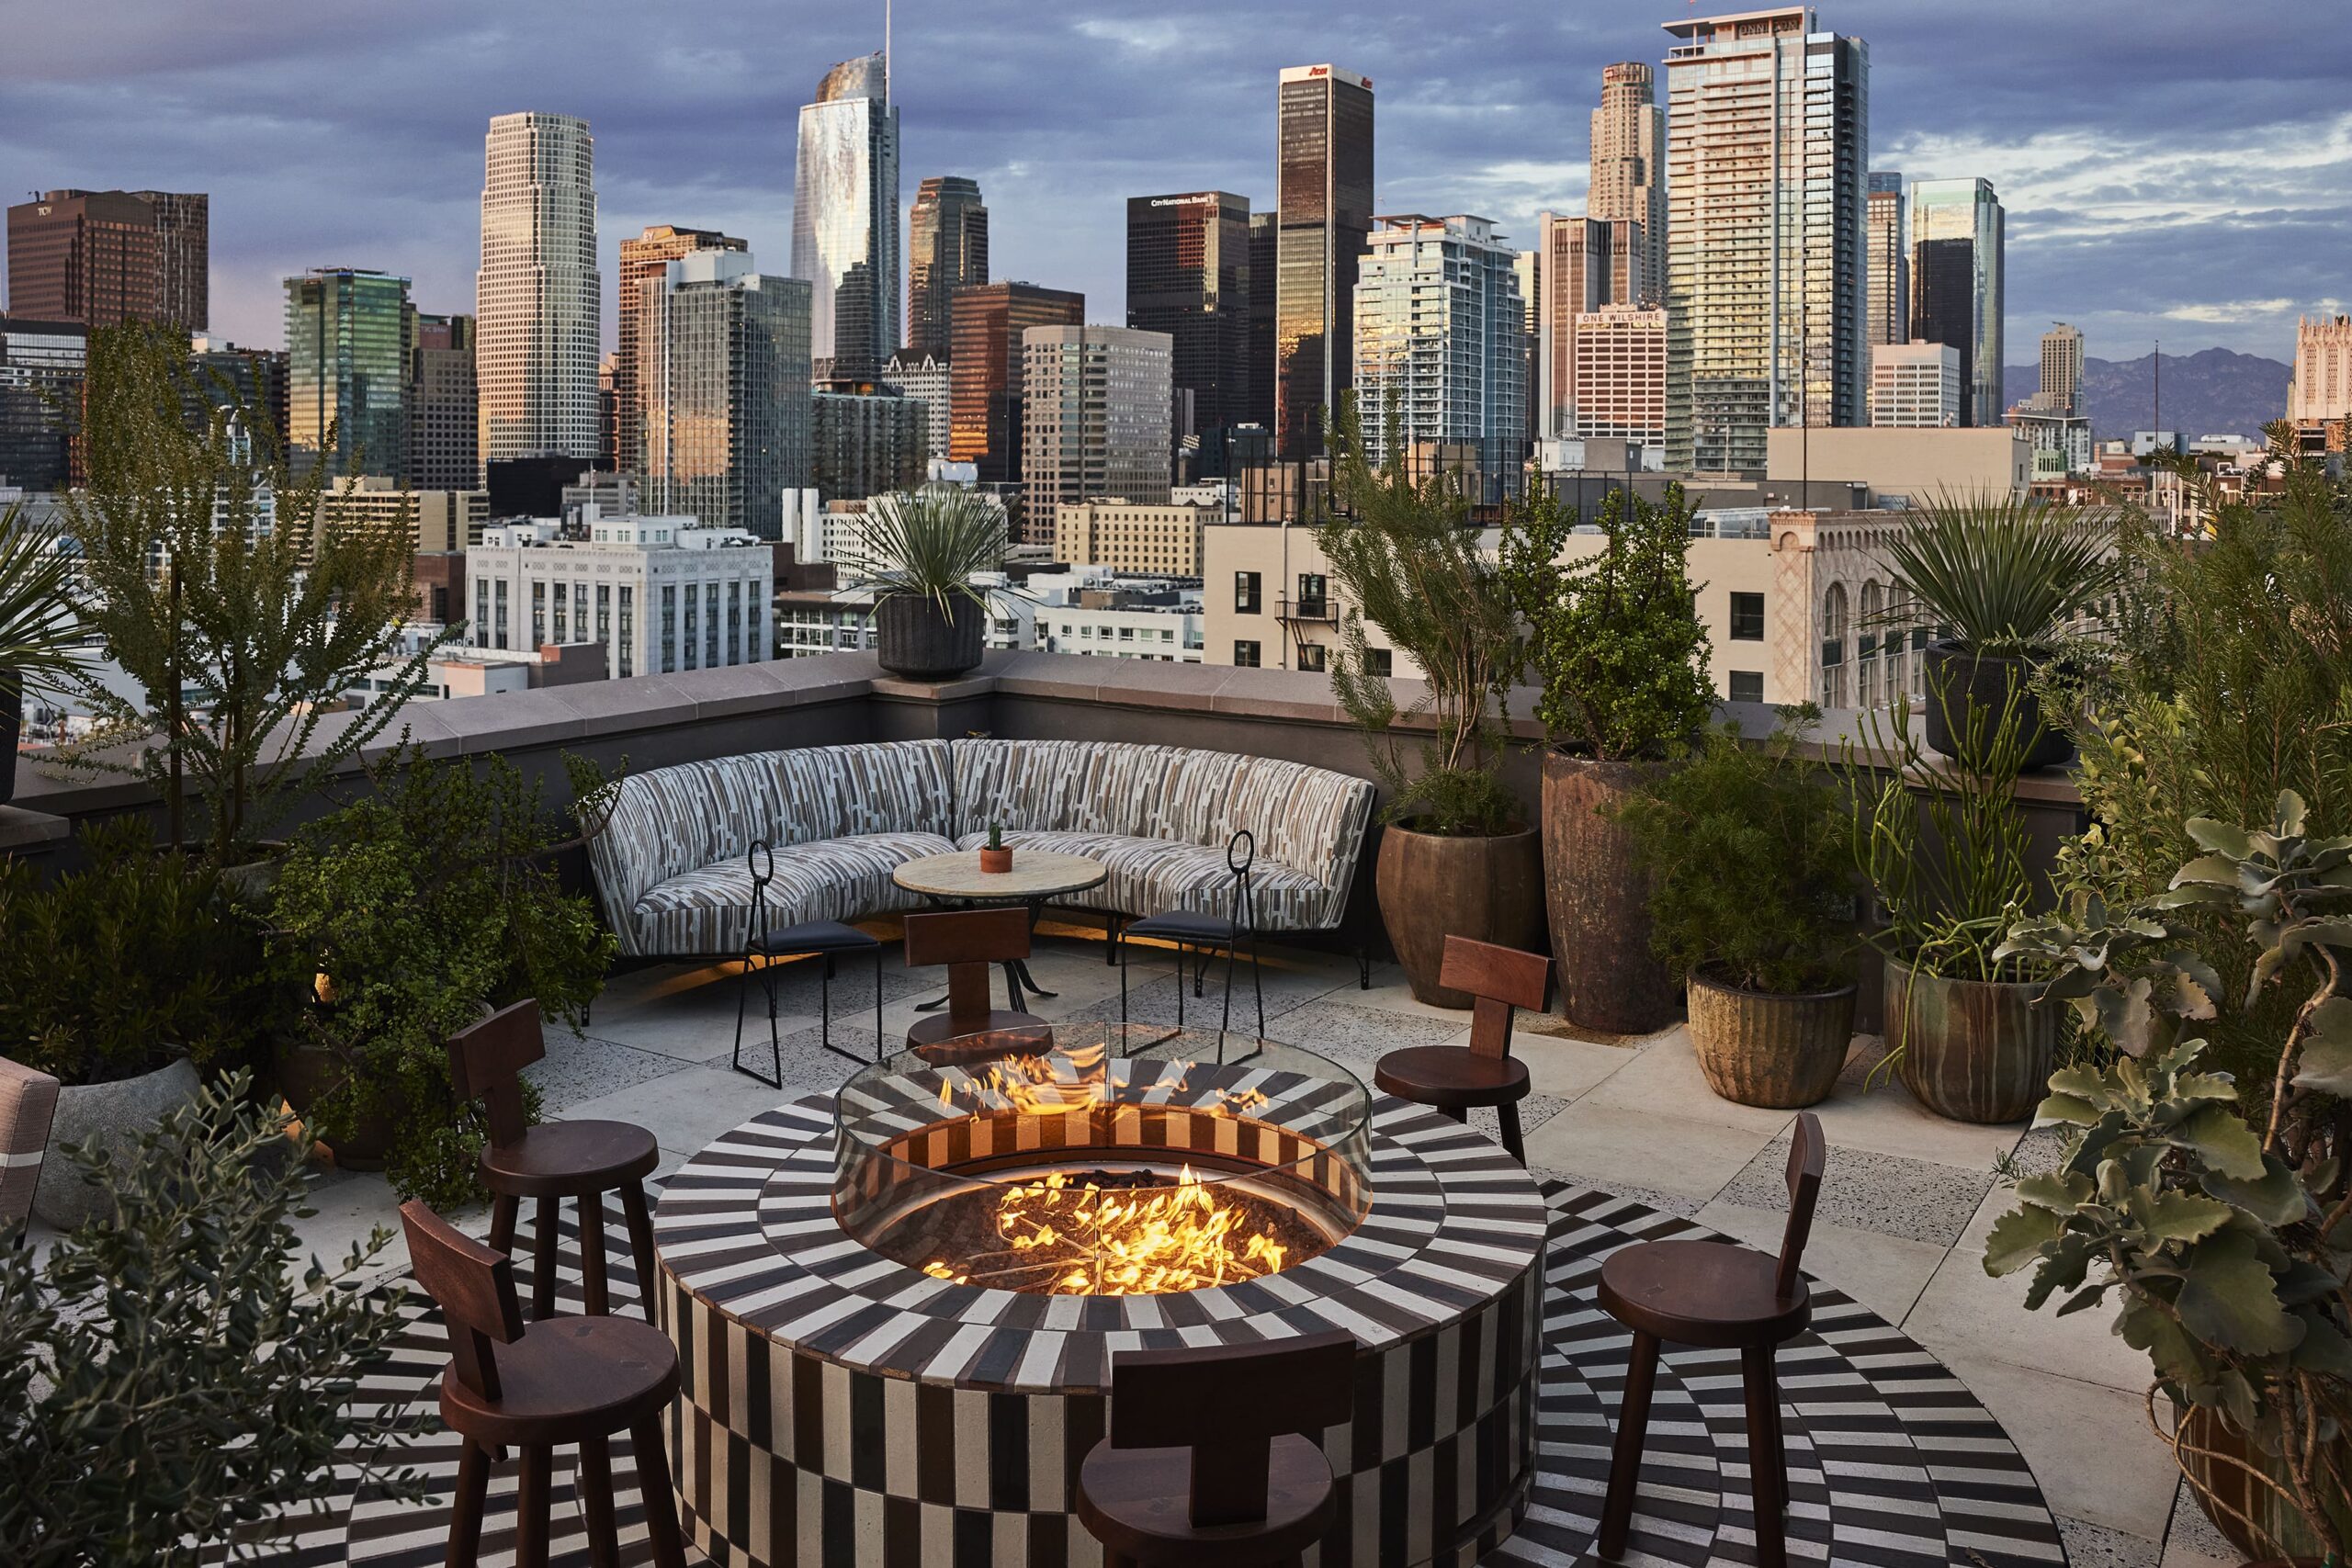 Cara Cara's DTLA panoramic rooftop experience is fabulous, and the perfect place to welcome the New Year. Photo Credit: The Ingalls